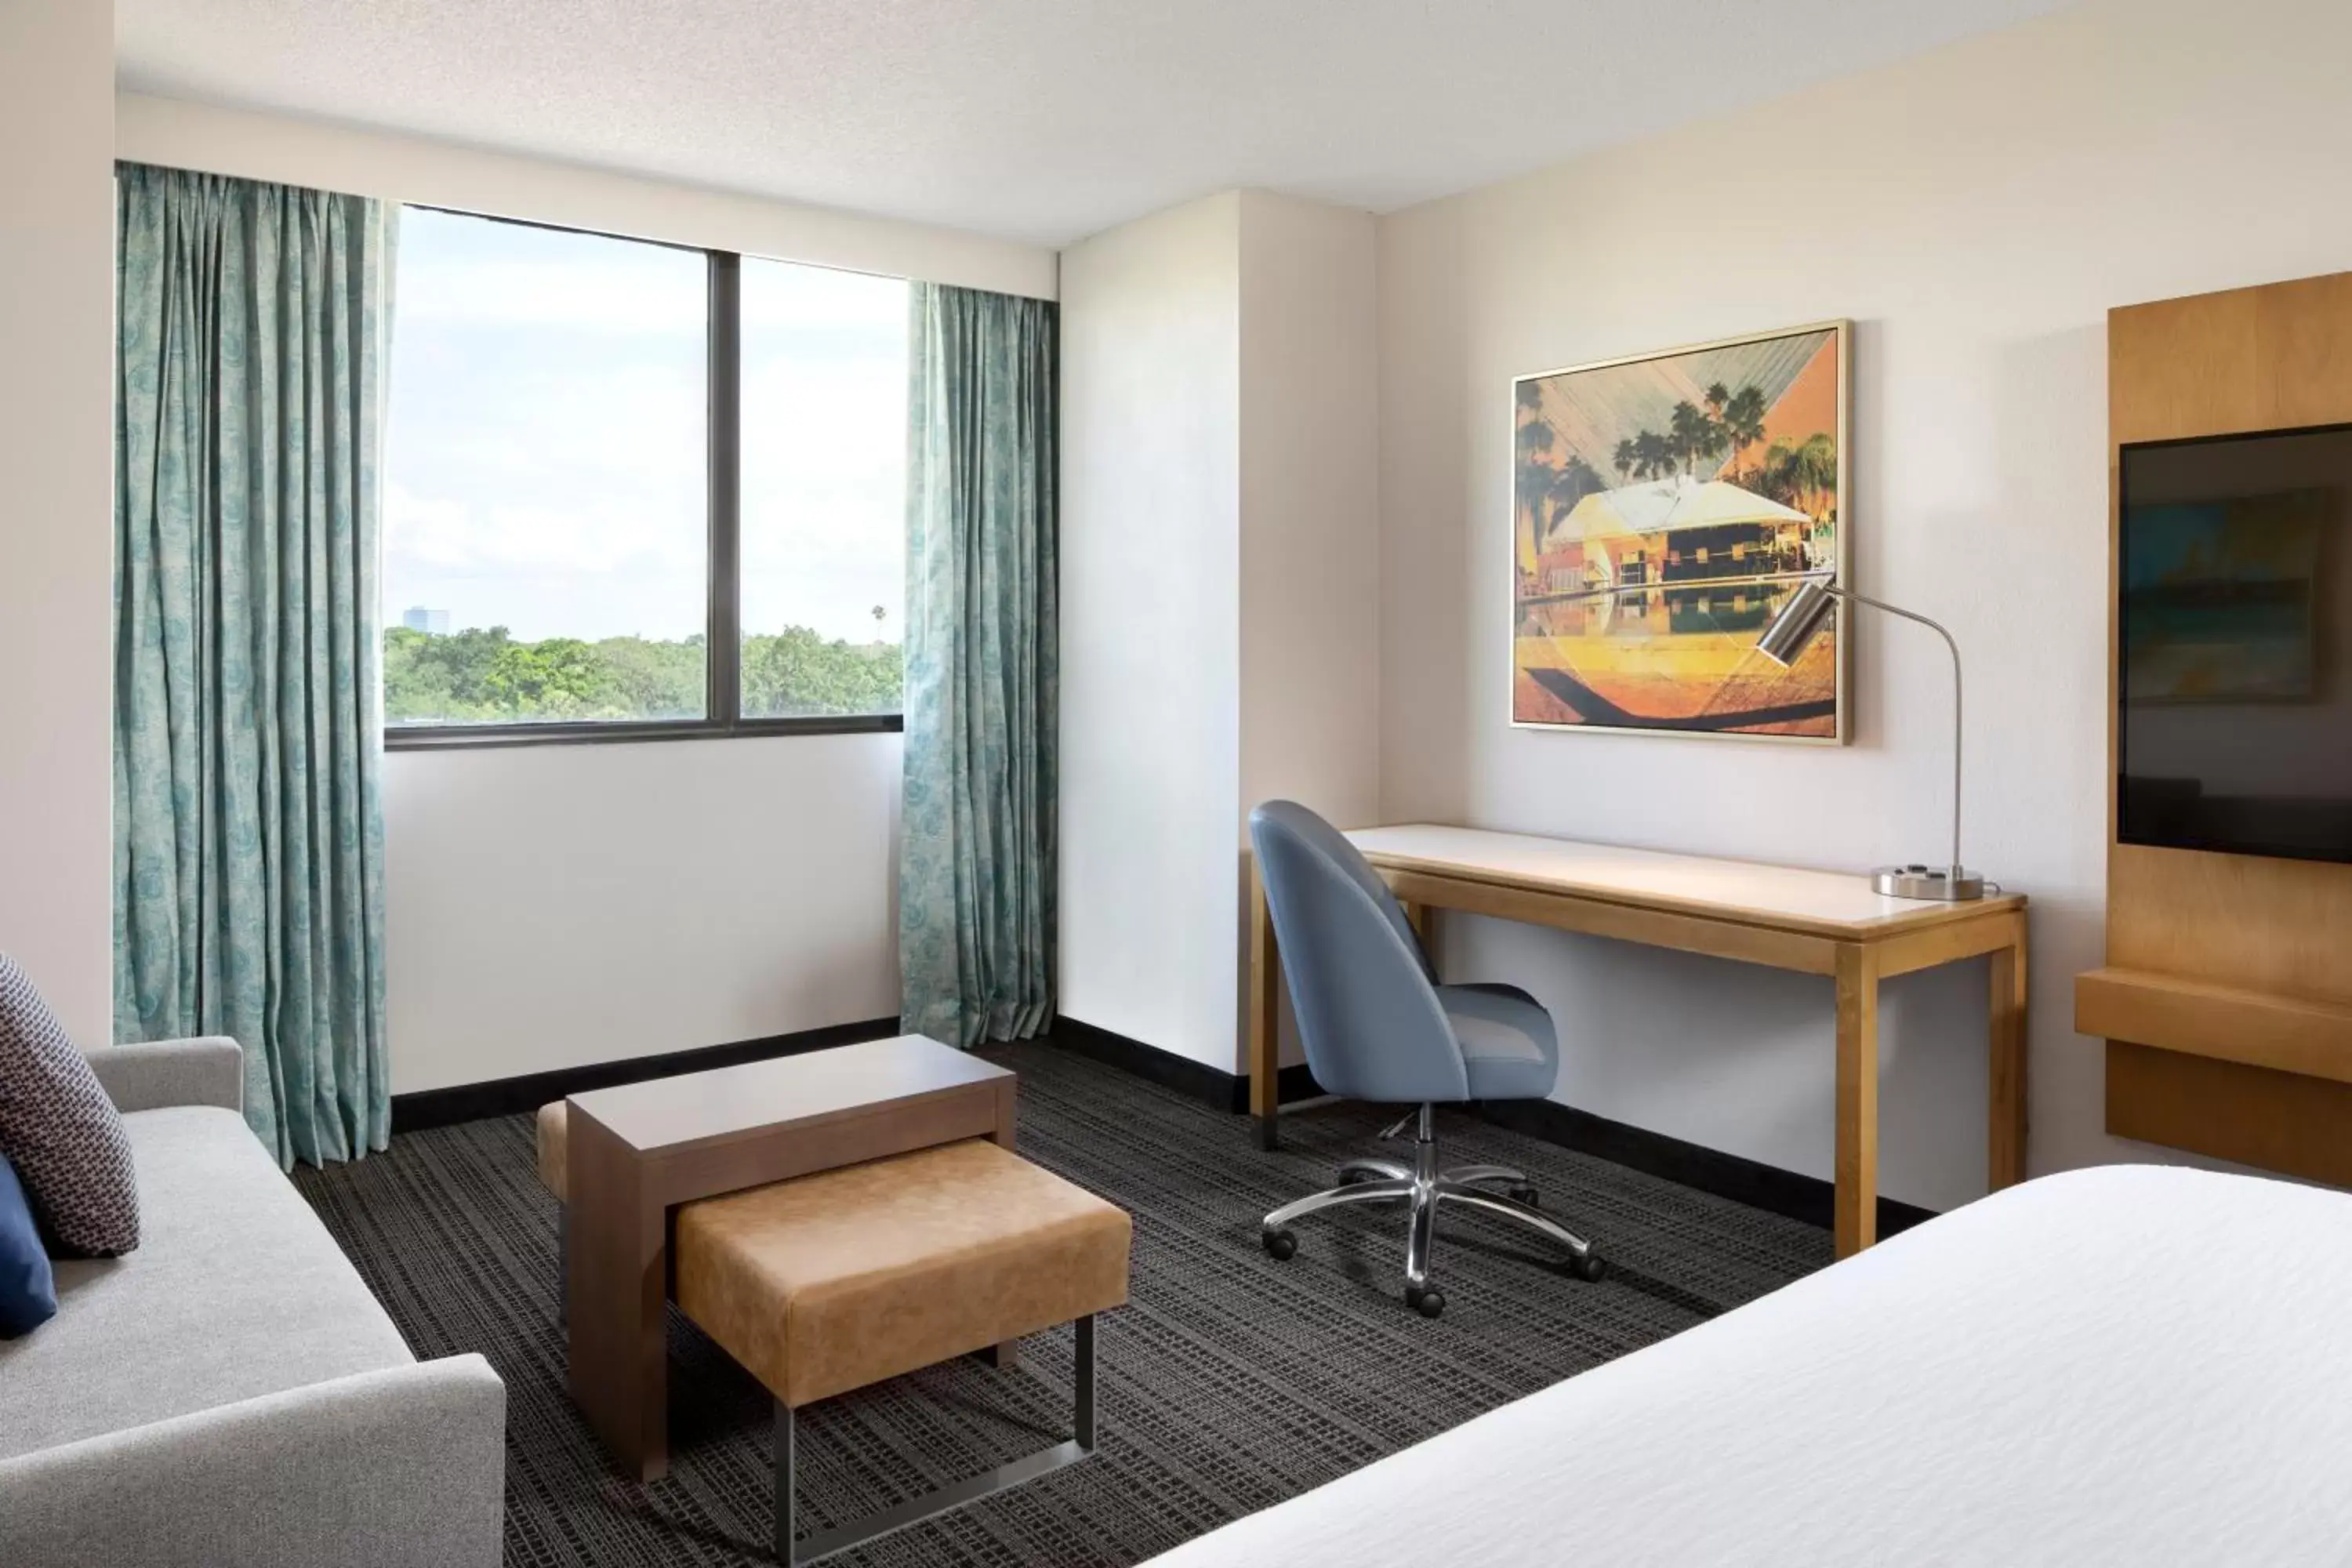 King Studio Suite - Non-Smoking in Embassy Suites by Hilton Tampa Airport Westshore